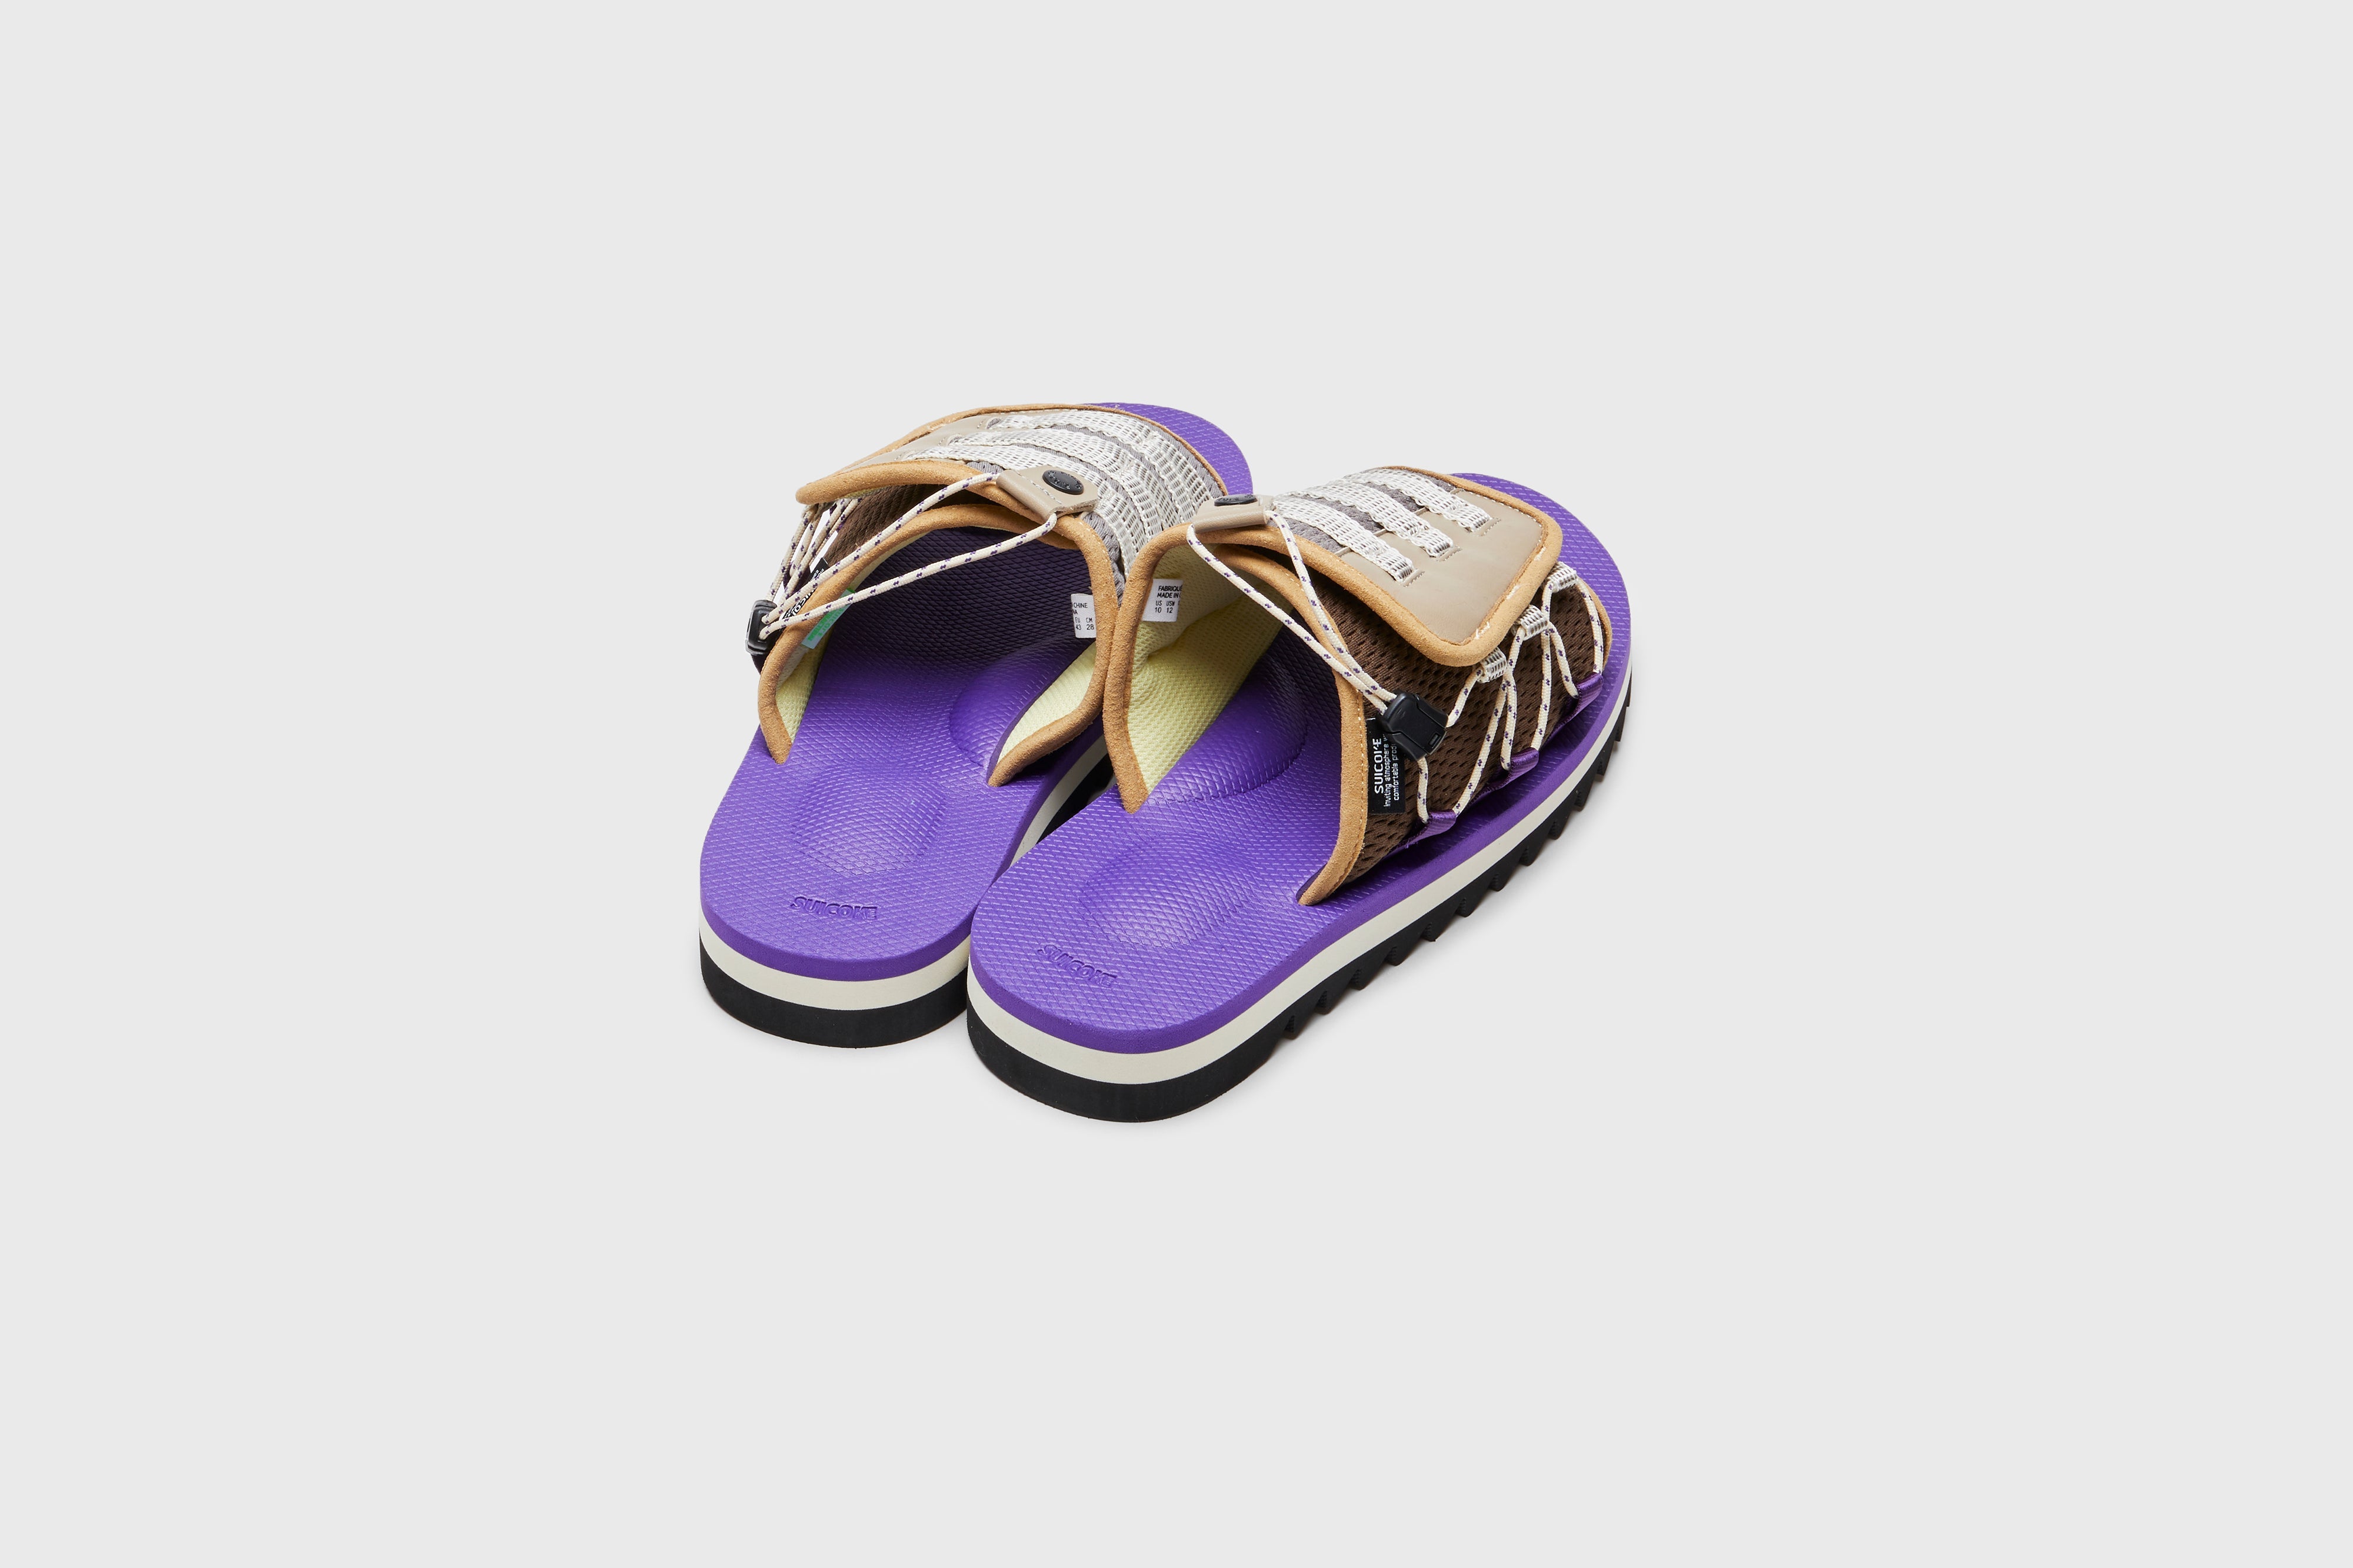 SUICOKE DAO-2AB slides with brown &amp; purple nylon upper, brown &amp; purple midsole and sole, strap and logo patch. From Spring/Summer 2023 collection on eightywingold Web Store, an official partner of SUICOKE. OG-195-2AB BROWN X PURPLE